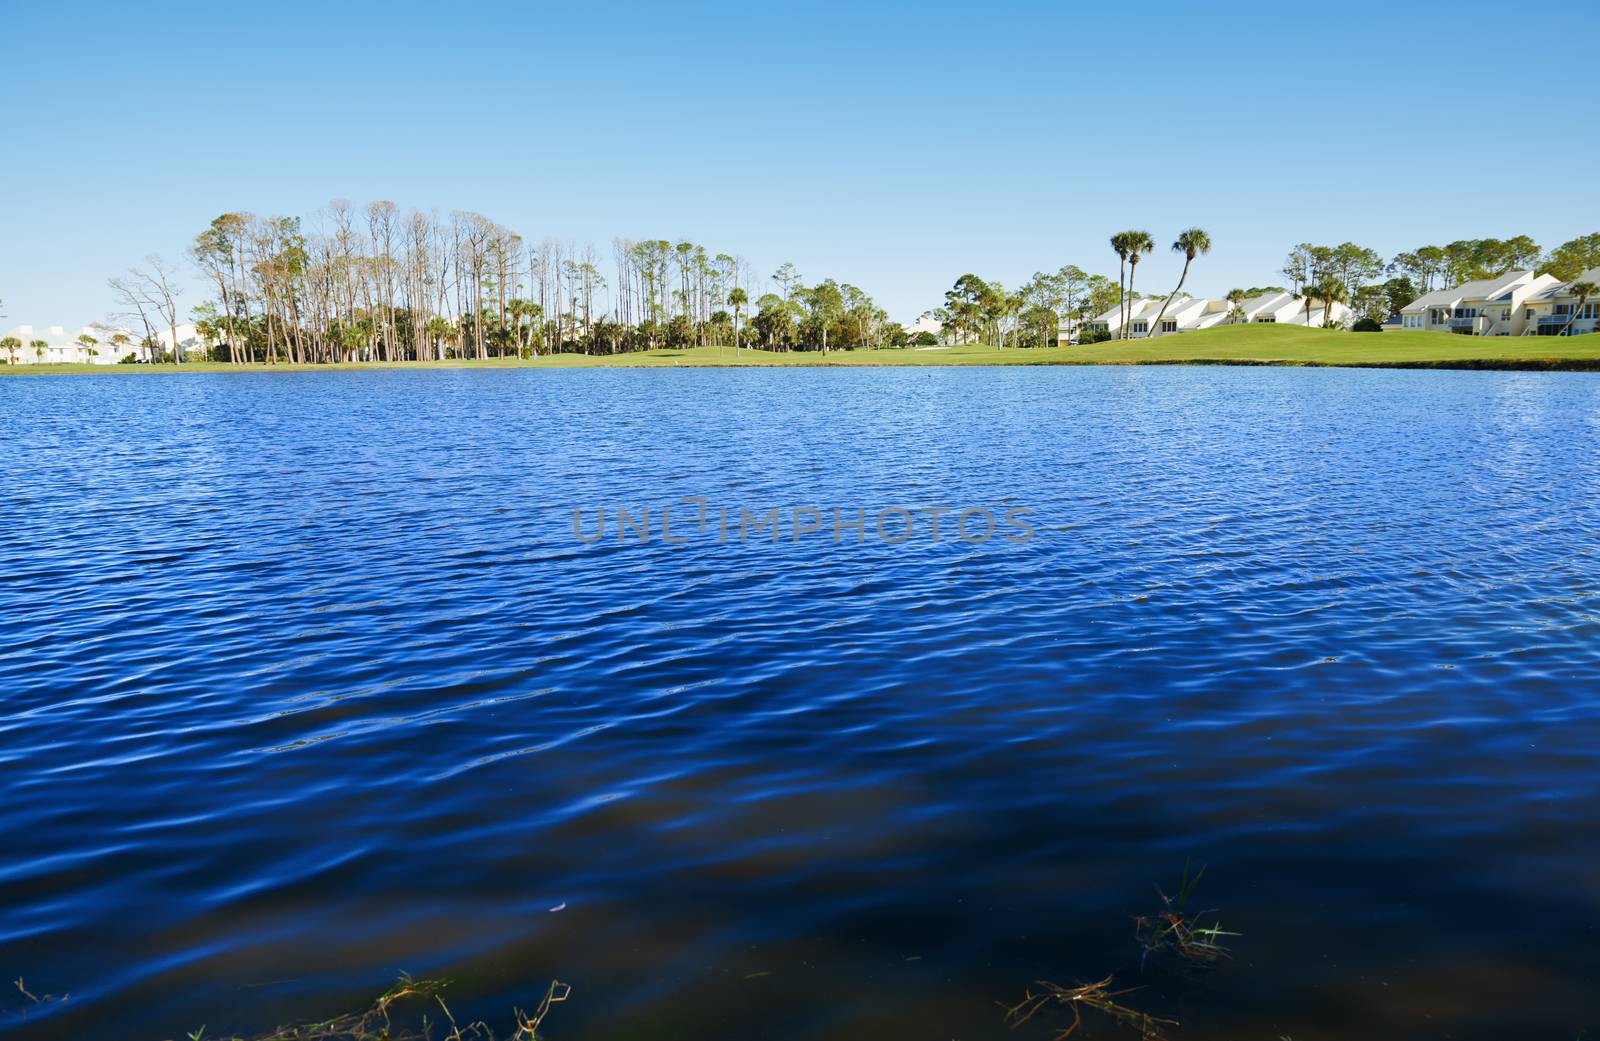 Lake in residential district, Florida, USA by Novic